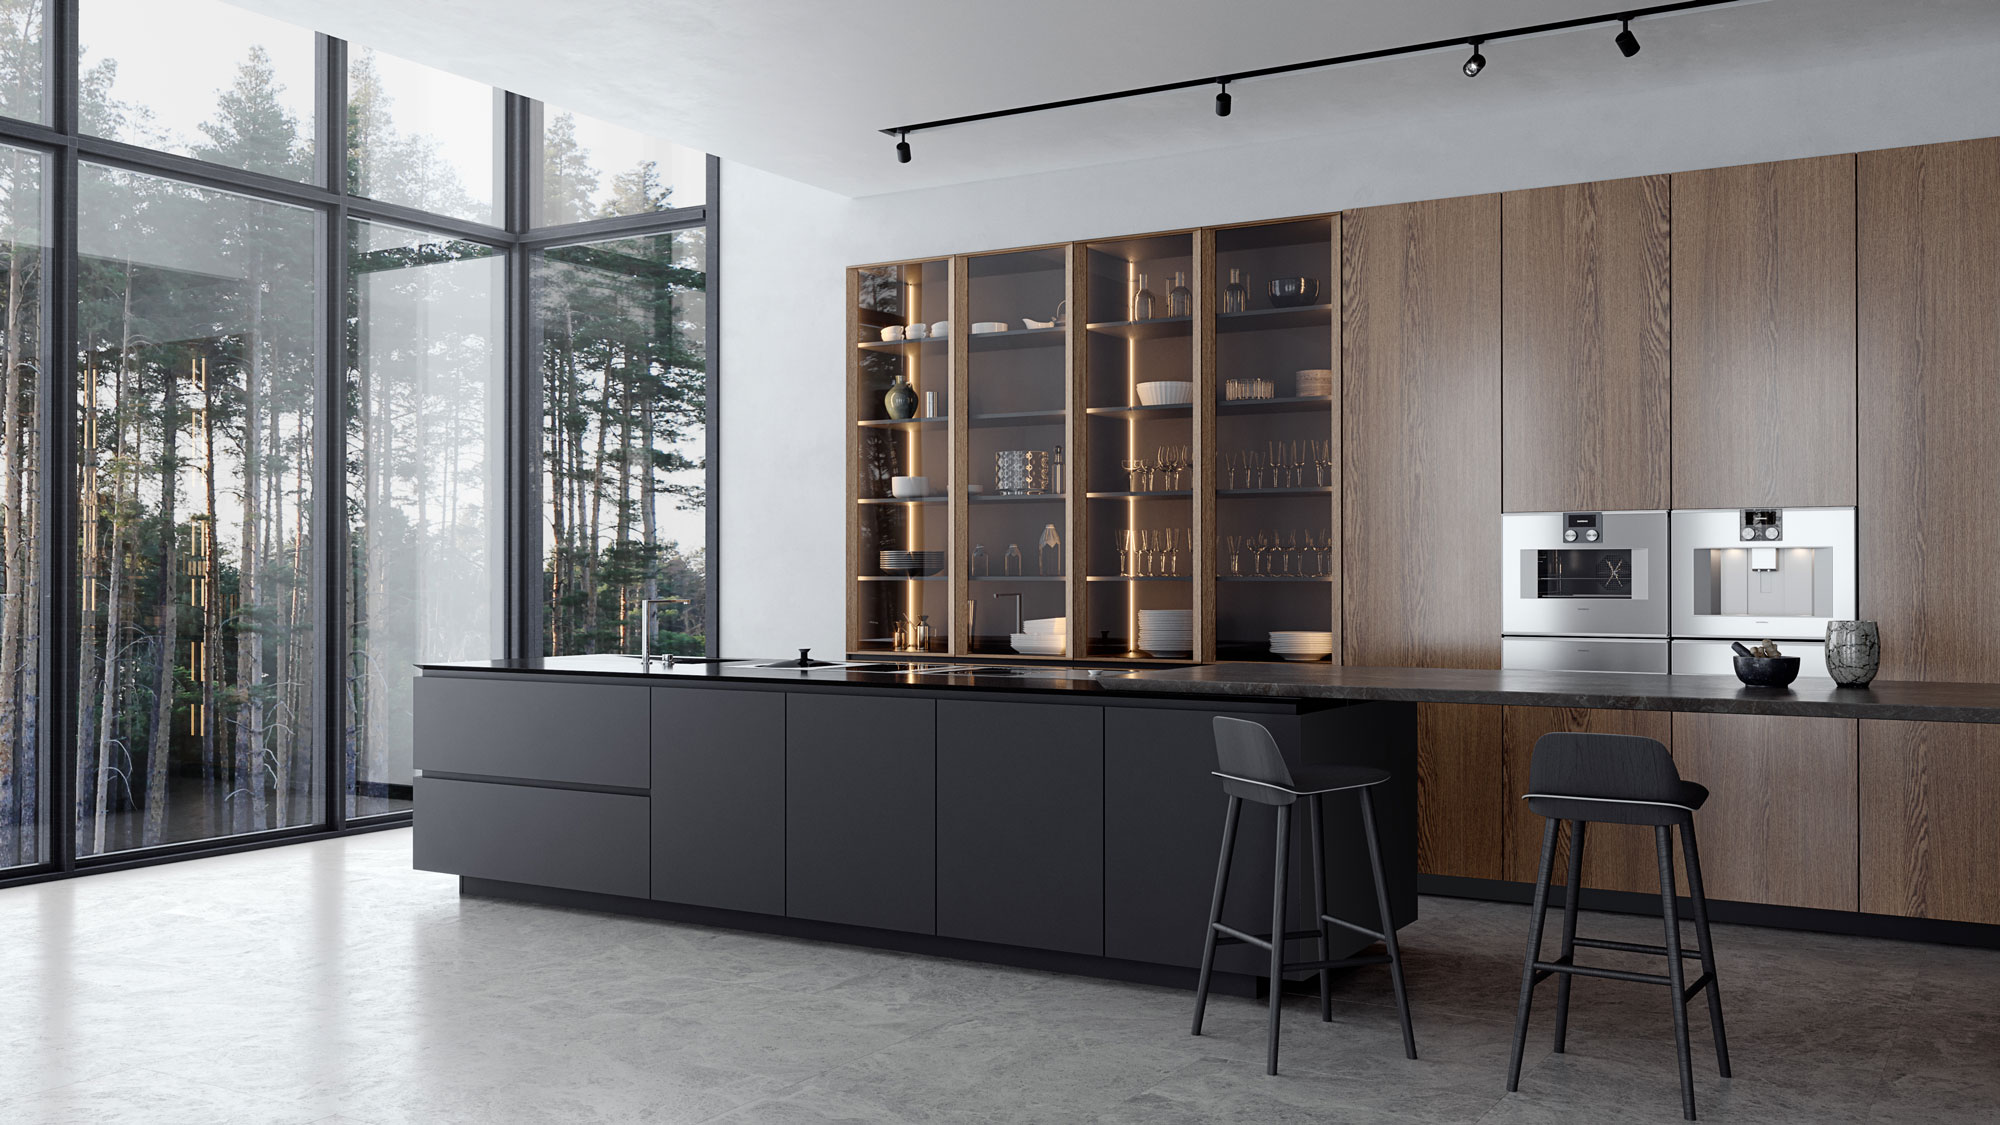 Full CG - Home Appliances - Showroom Forrest - Totale